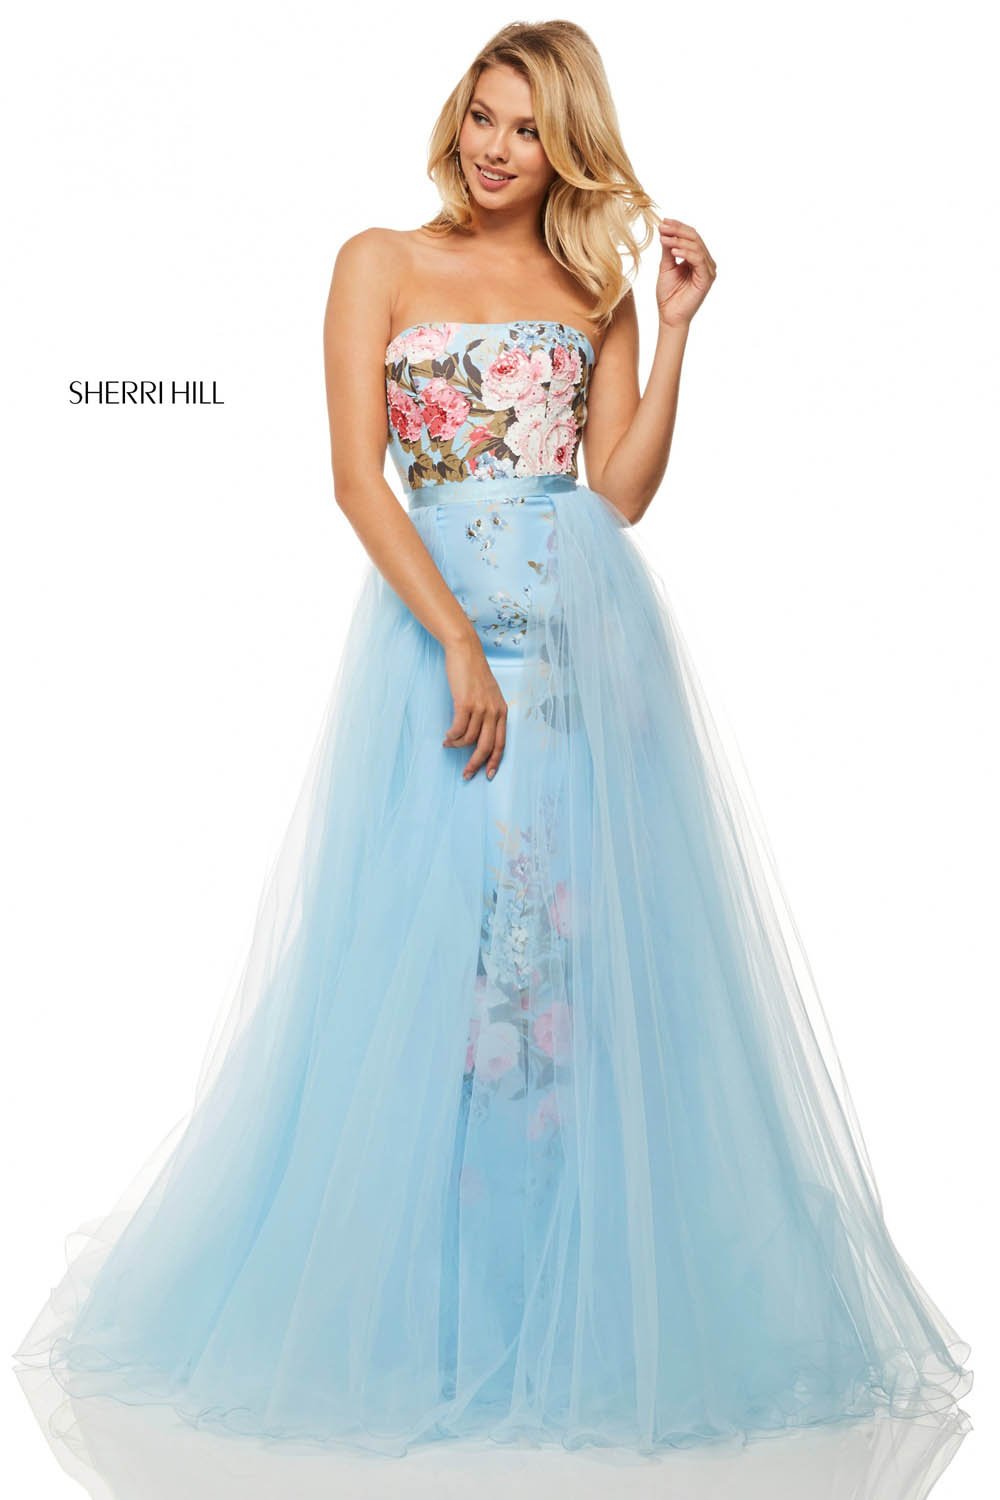 Sherri Hill 52869 dress images in these colors: Ivory Print, Light Blue Print.